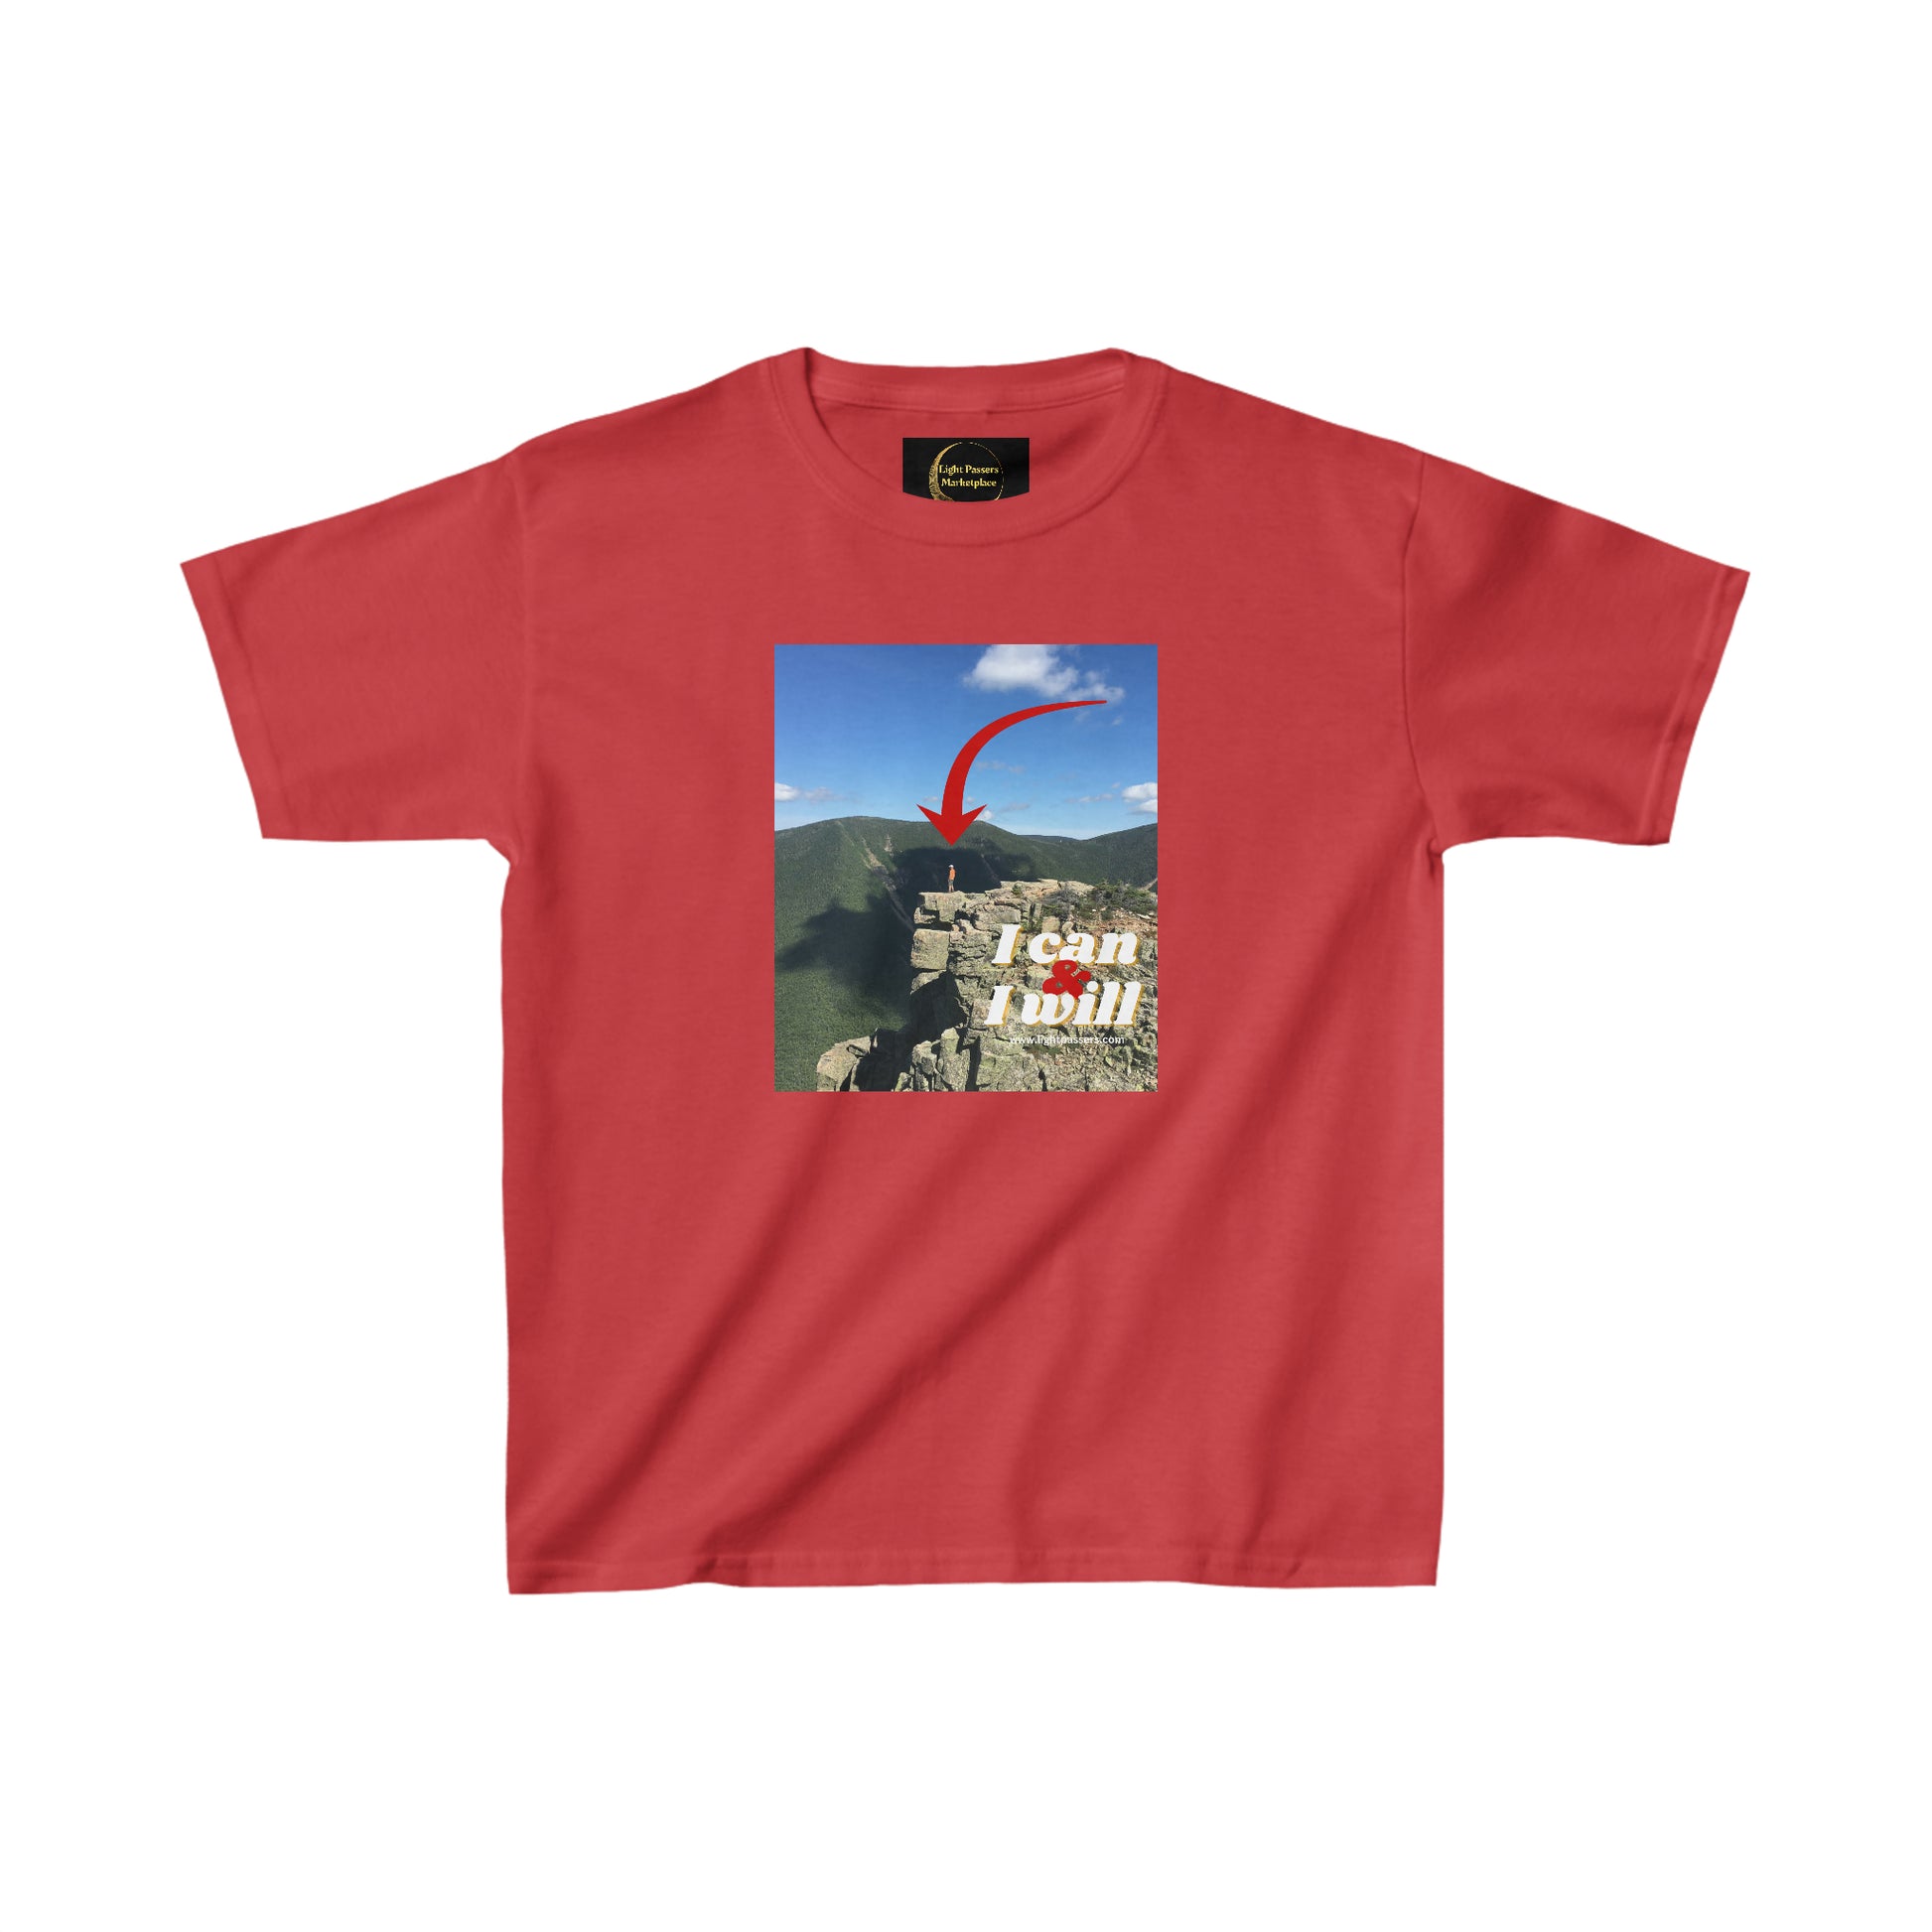 Youth T-shirt featuring a picture of a mountain and a red arrow, ideal for daily wear. Made of 100% cotton with twill tape shoulders for durability and a curl-resistant collar. Ethically sourced US cotton.